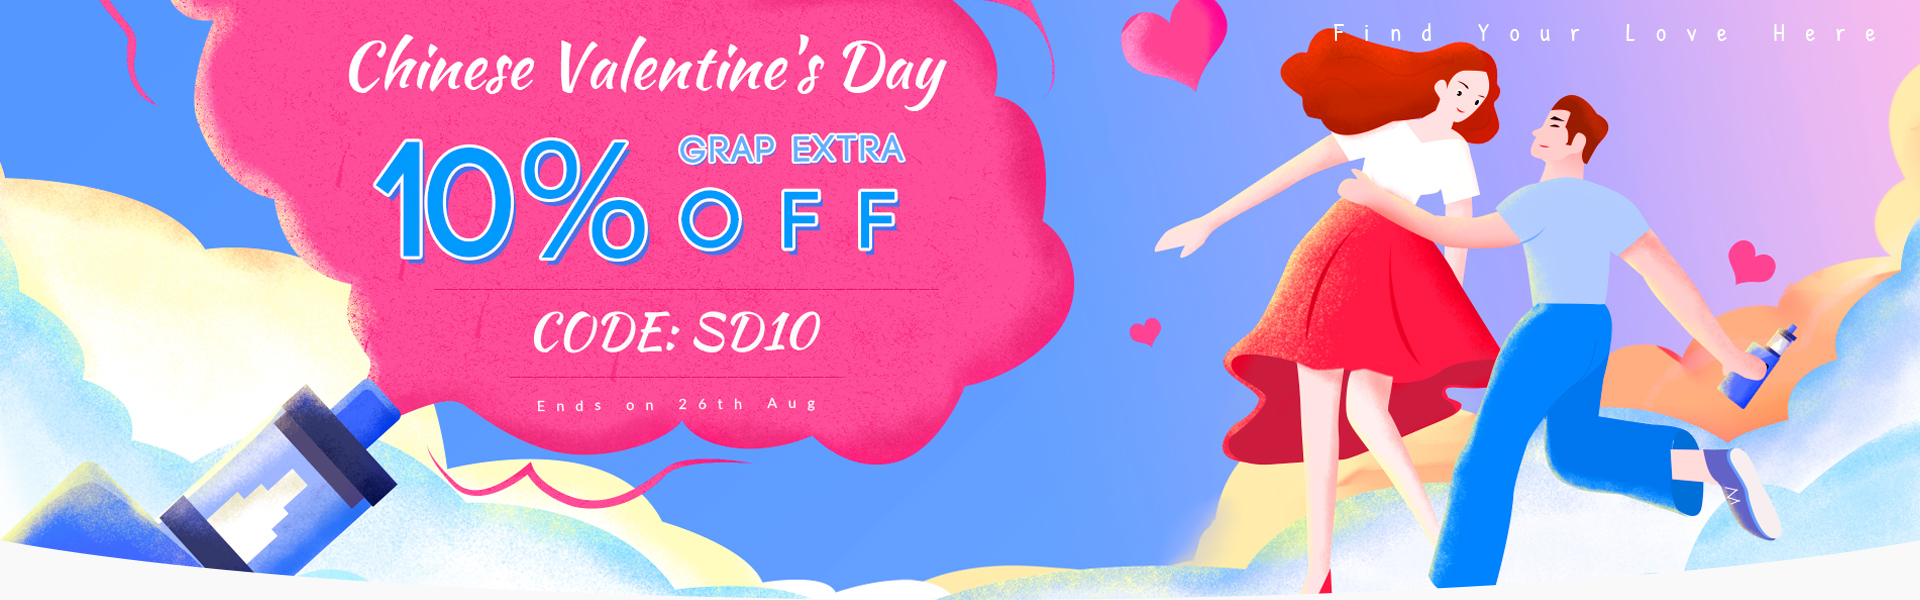 chinese_valentines_day_extra_10__off.jpg